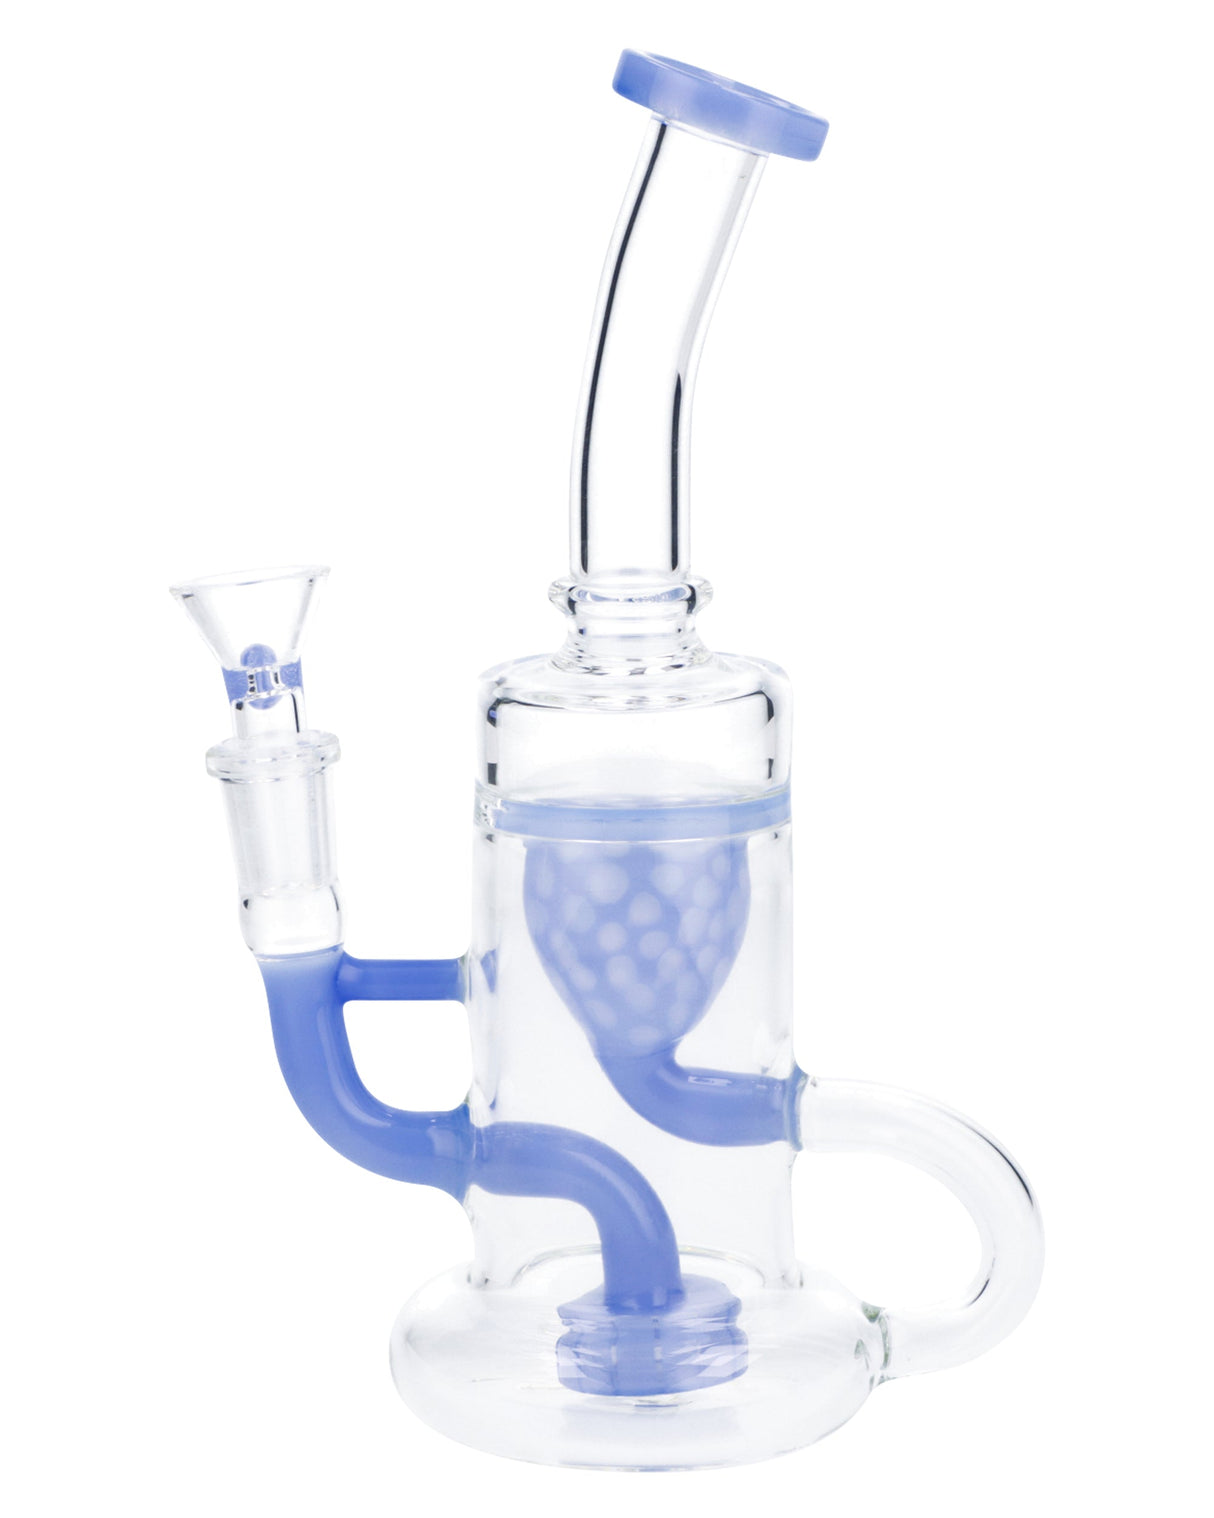 Milky Blue Quartz Water Pipe with Bent Neck, 90 Degree Joint, and Bowl - Front View